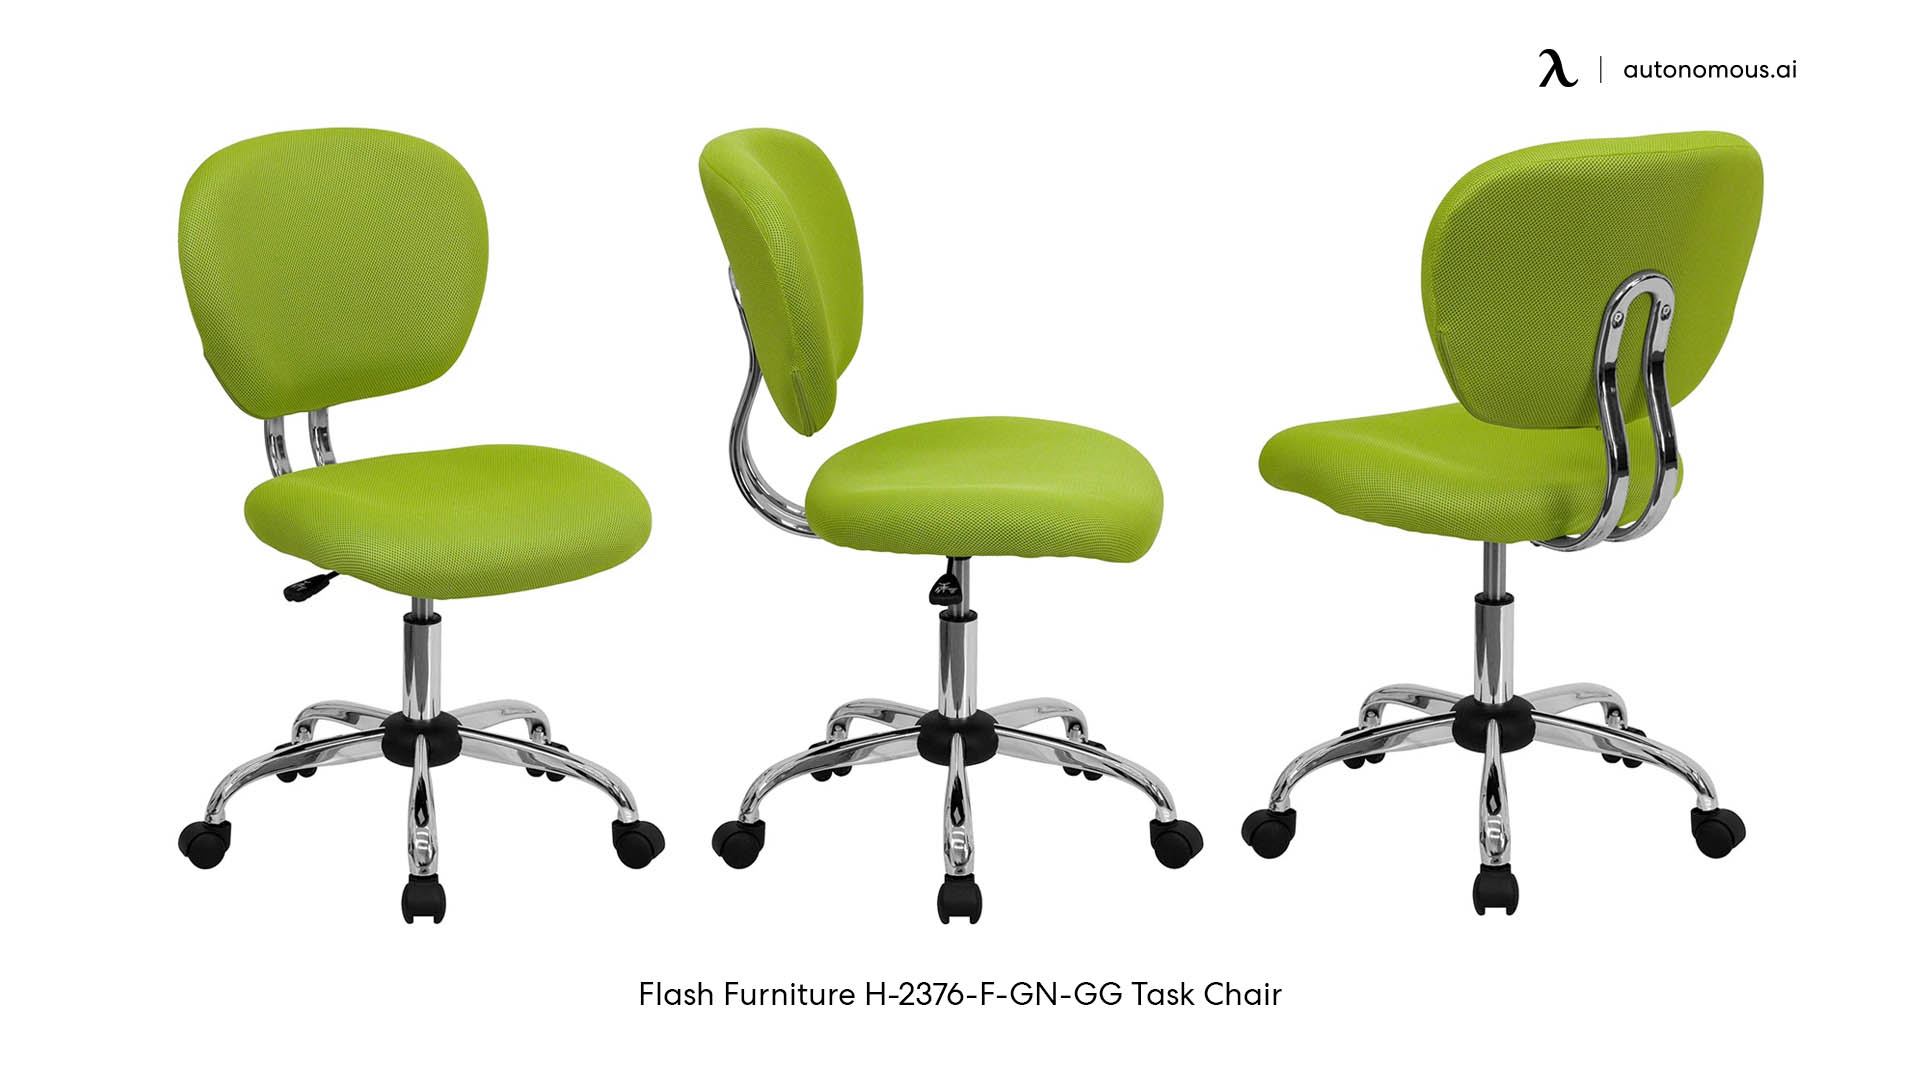 Flash Furniture H-2376-F-GN-GG green office chair